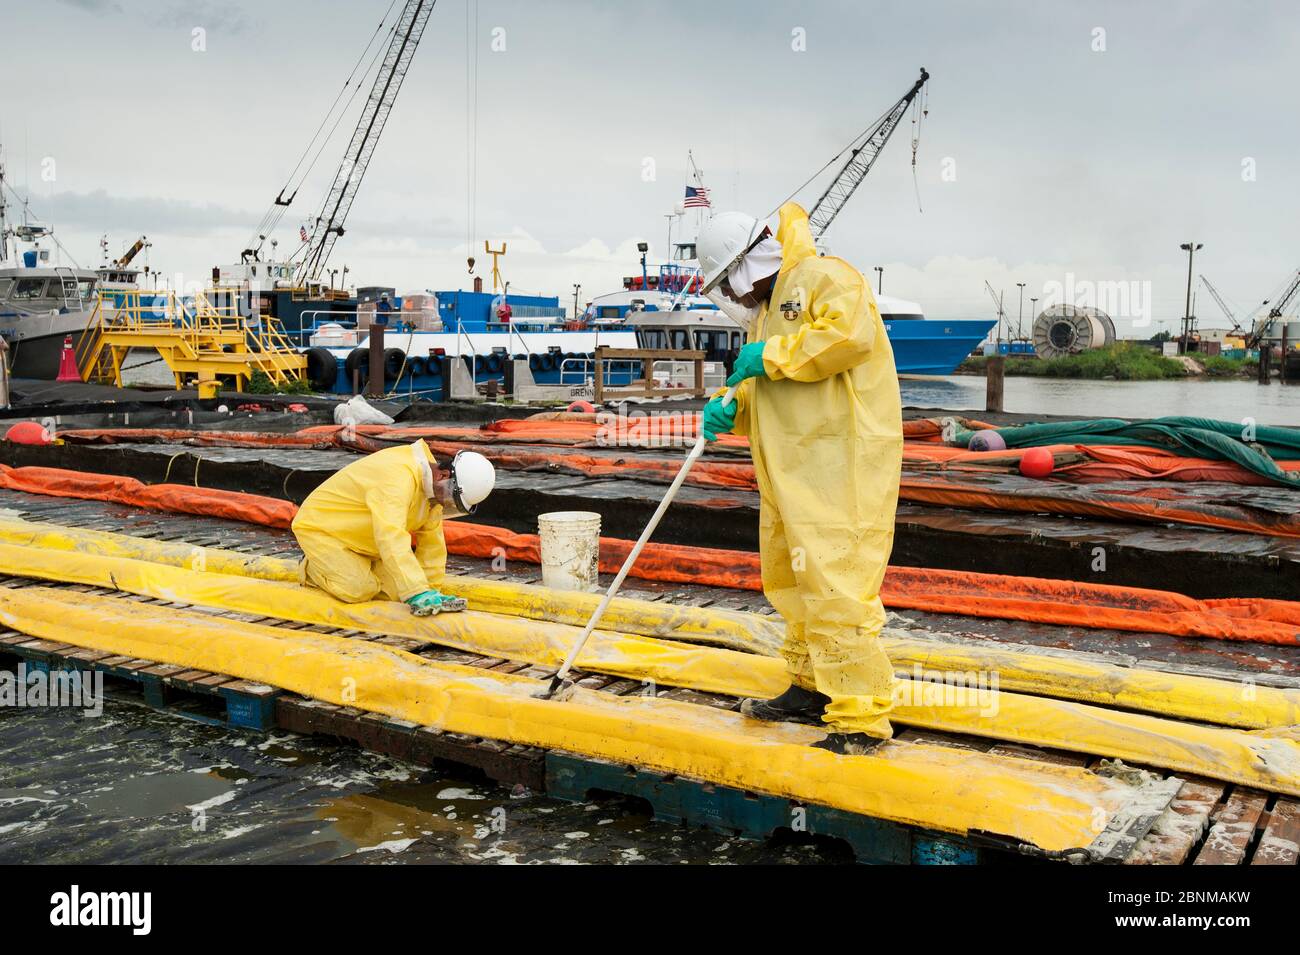 Men cleaning oil containment booms during Deepwater Horizon oil spill, Louisiana, Gulf of Mexico, USA, August 2010 Stock Photo